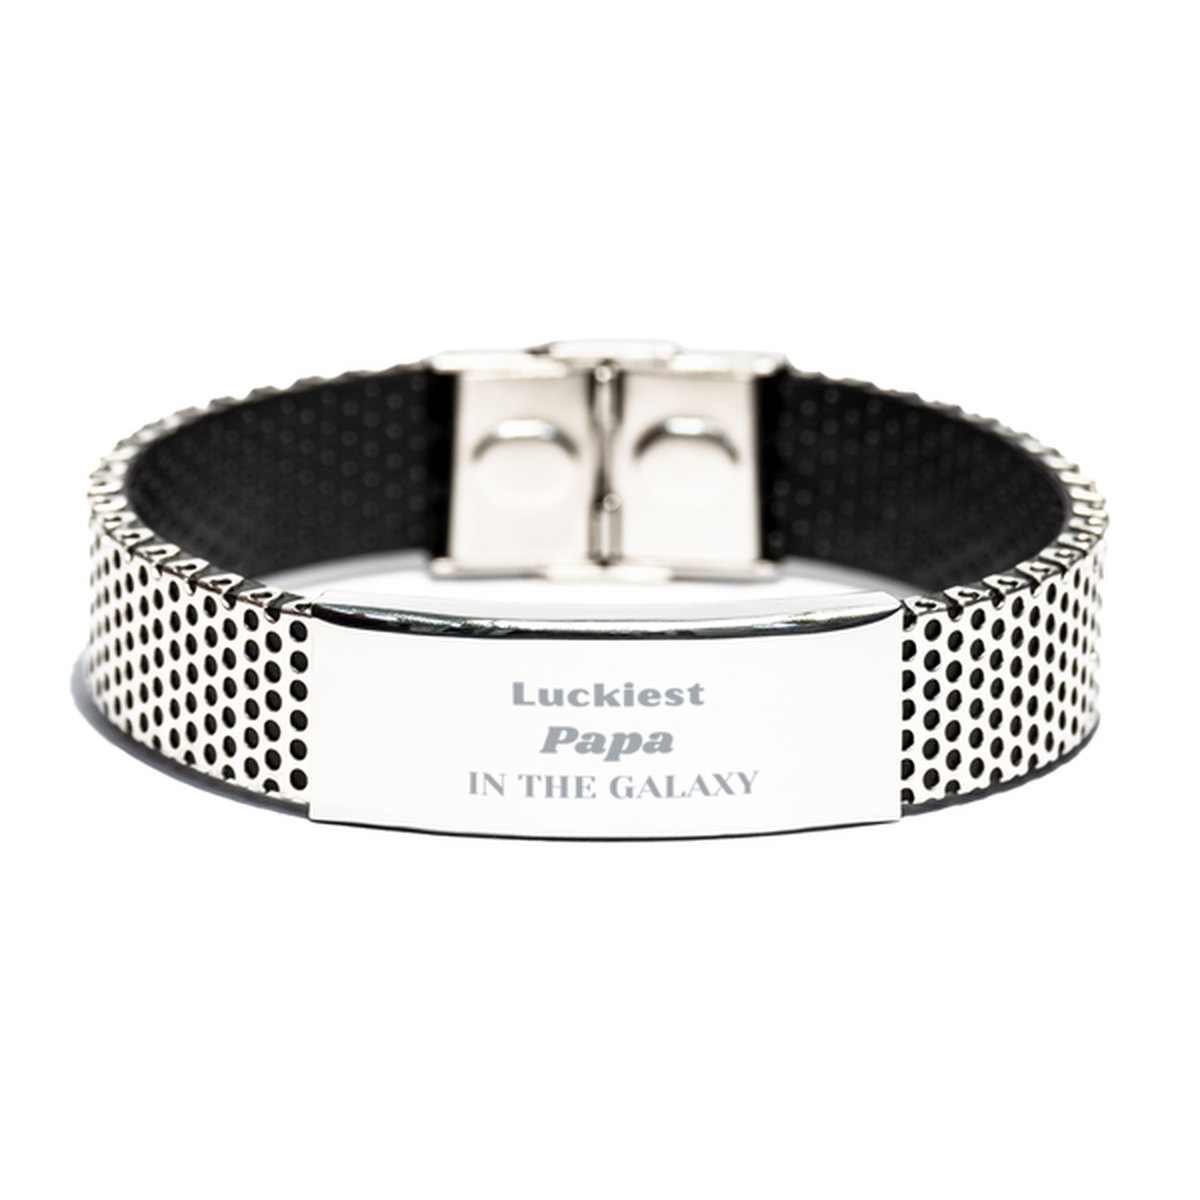 Luckiest Papa in the Galaxy, To My Papa Engraved Gifts, Christmas Papa Stainless Steel Bracelet Gifts, X-mas Birthday Unique Gifts For Papa Men Women